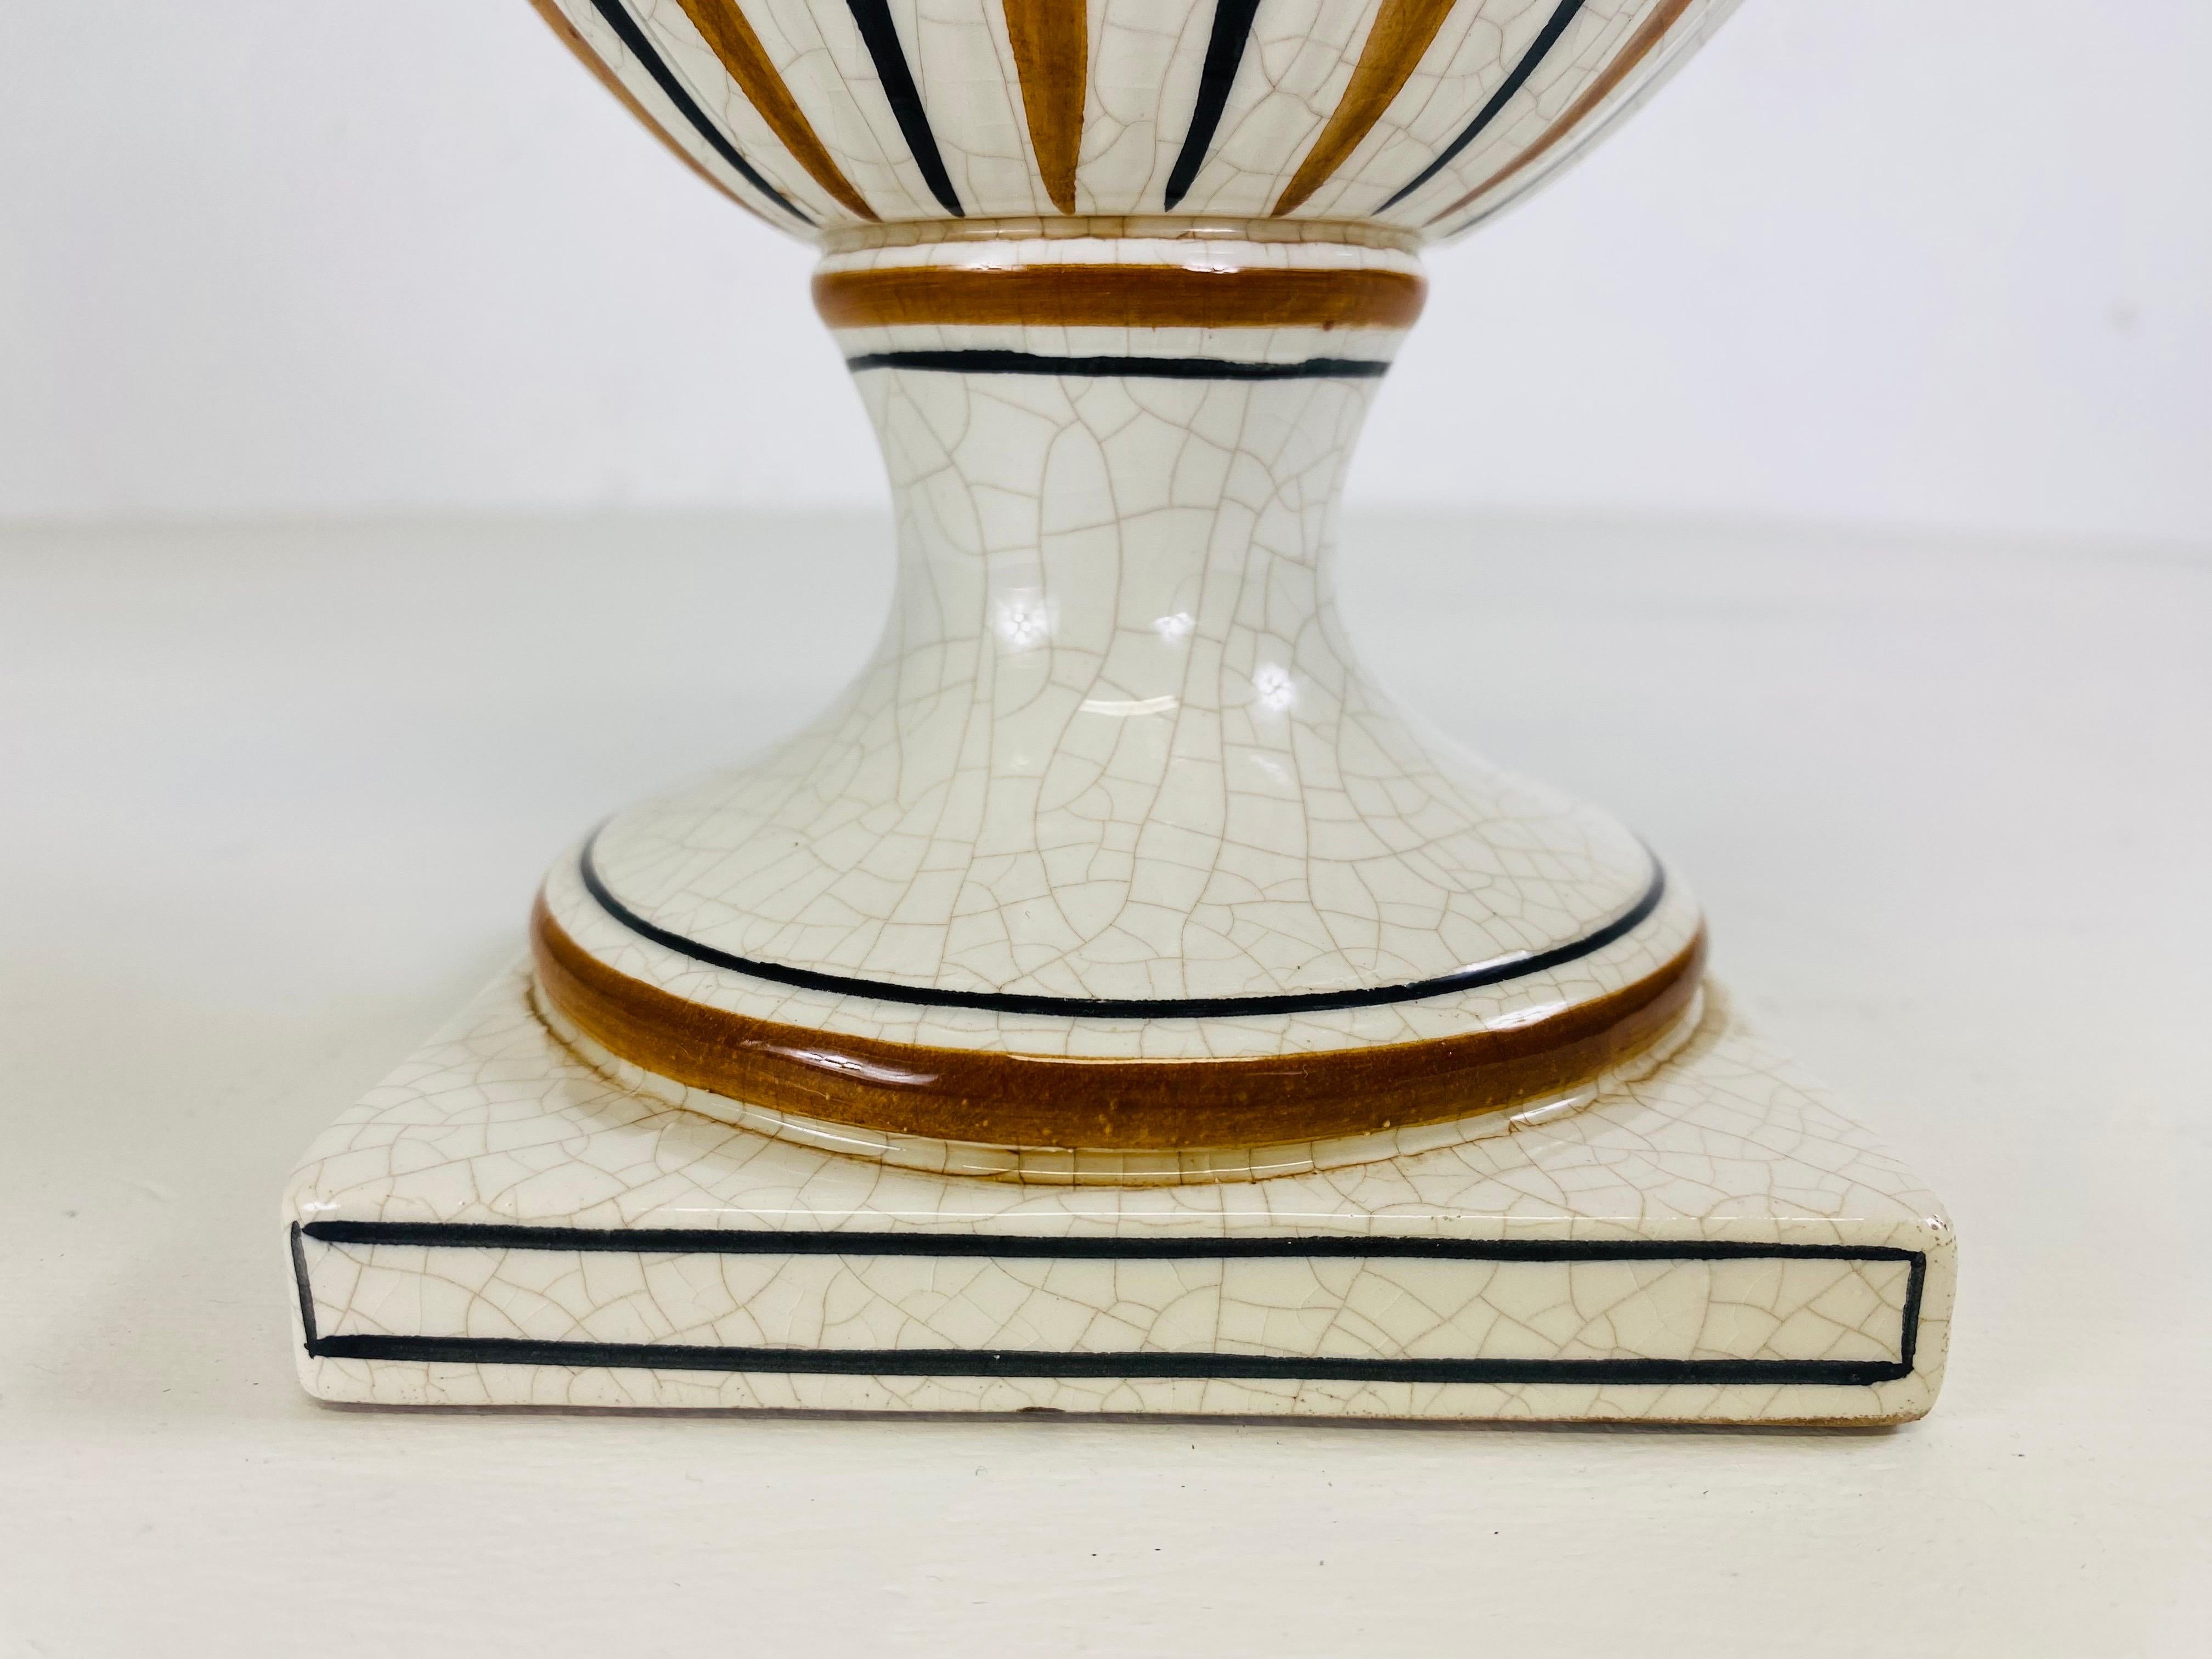 This is a mid century vintage hand painted pottery urn with lid. This hand painted classical Italian urn has beautiful tones of chocolate brown, Amber and cream. This urn with lid was made in Italy or 1950.